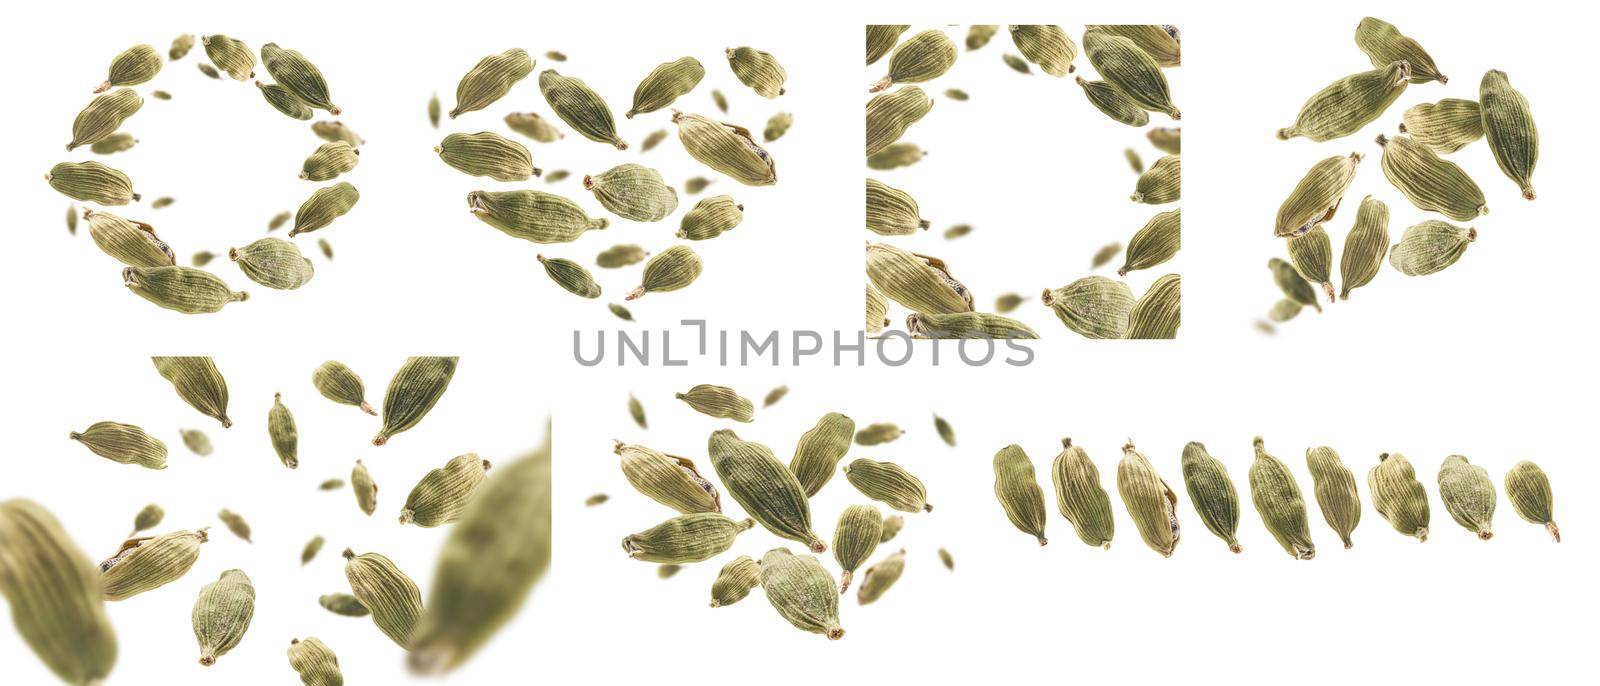 A set of photos. Cardamom pods levitate on a white background.